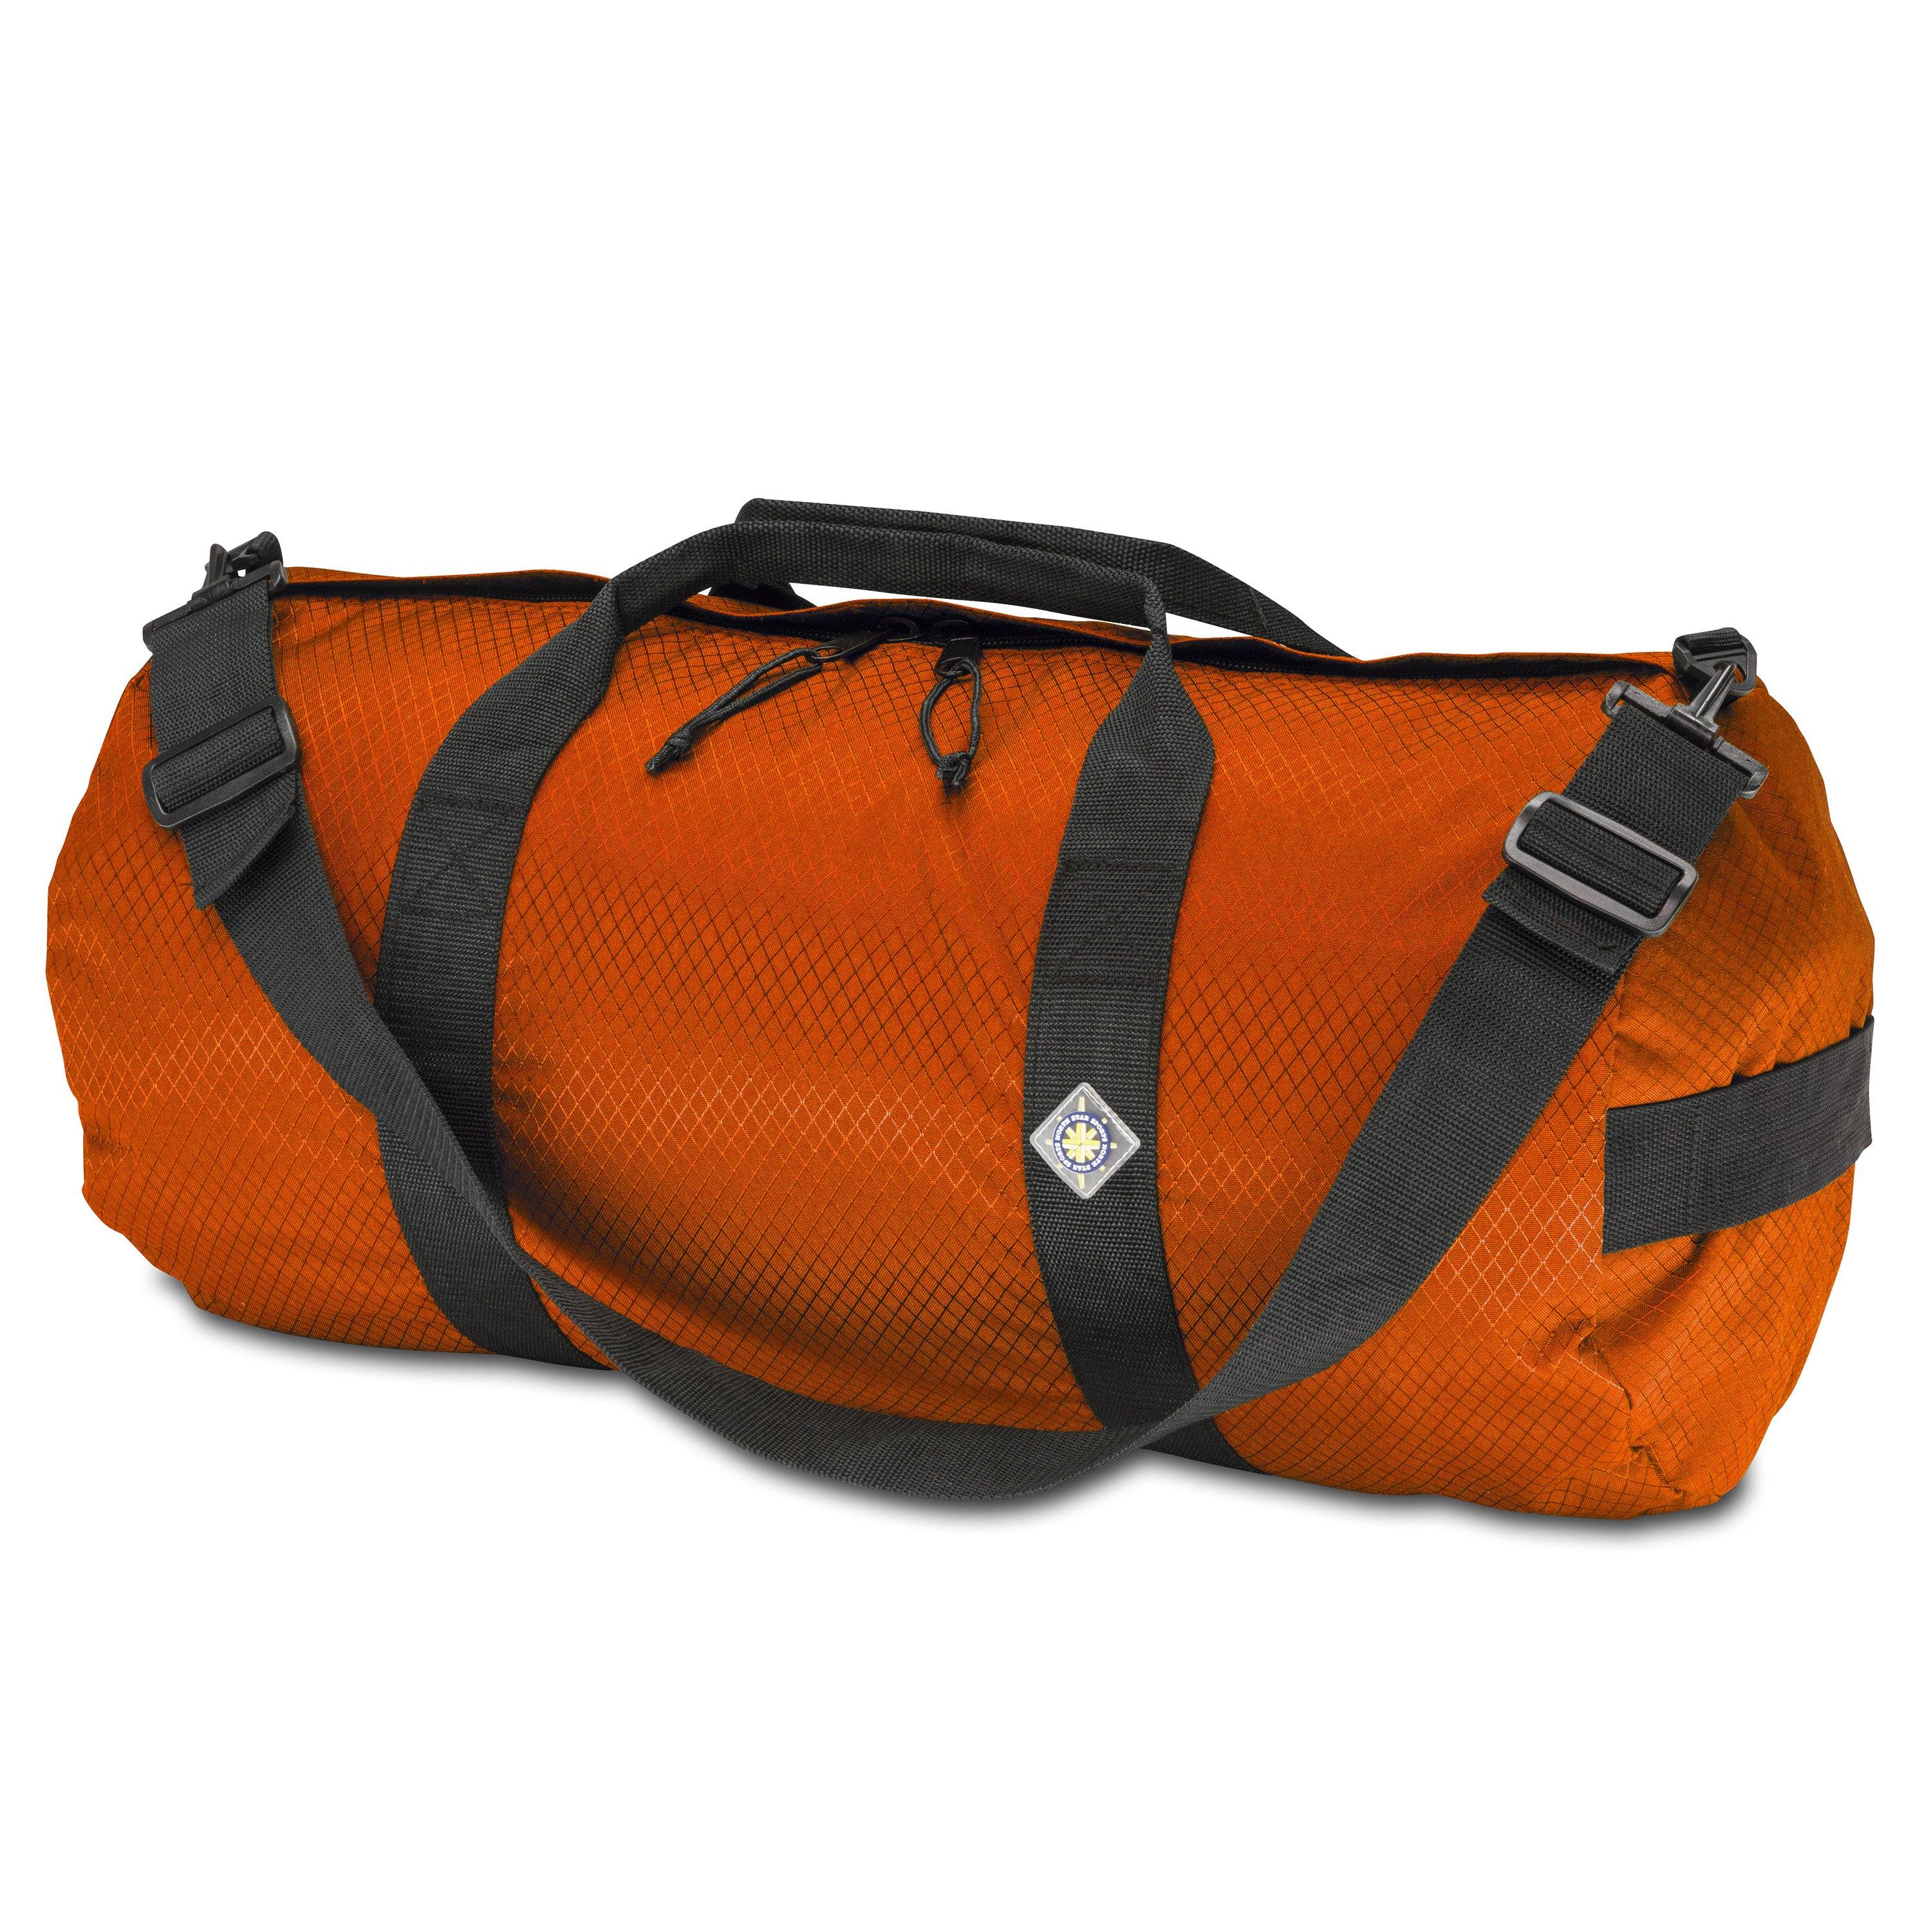 Studio photo the International Orange SD1224DLX Standard Duffle by Northstar Bags. 44 liter duffel with diamond ripstop fabric, thick webbing straps, and a large format metal zipper. Guaranteed for life.